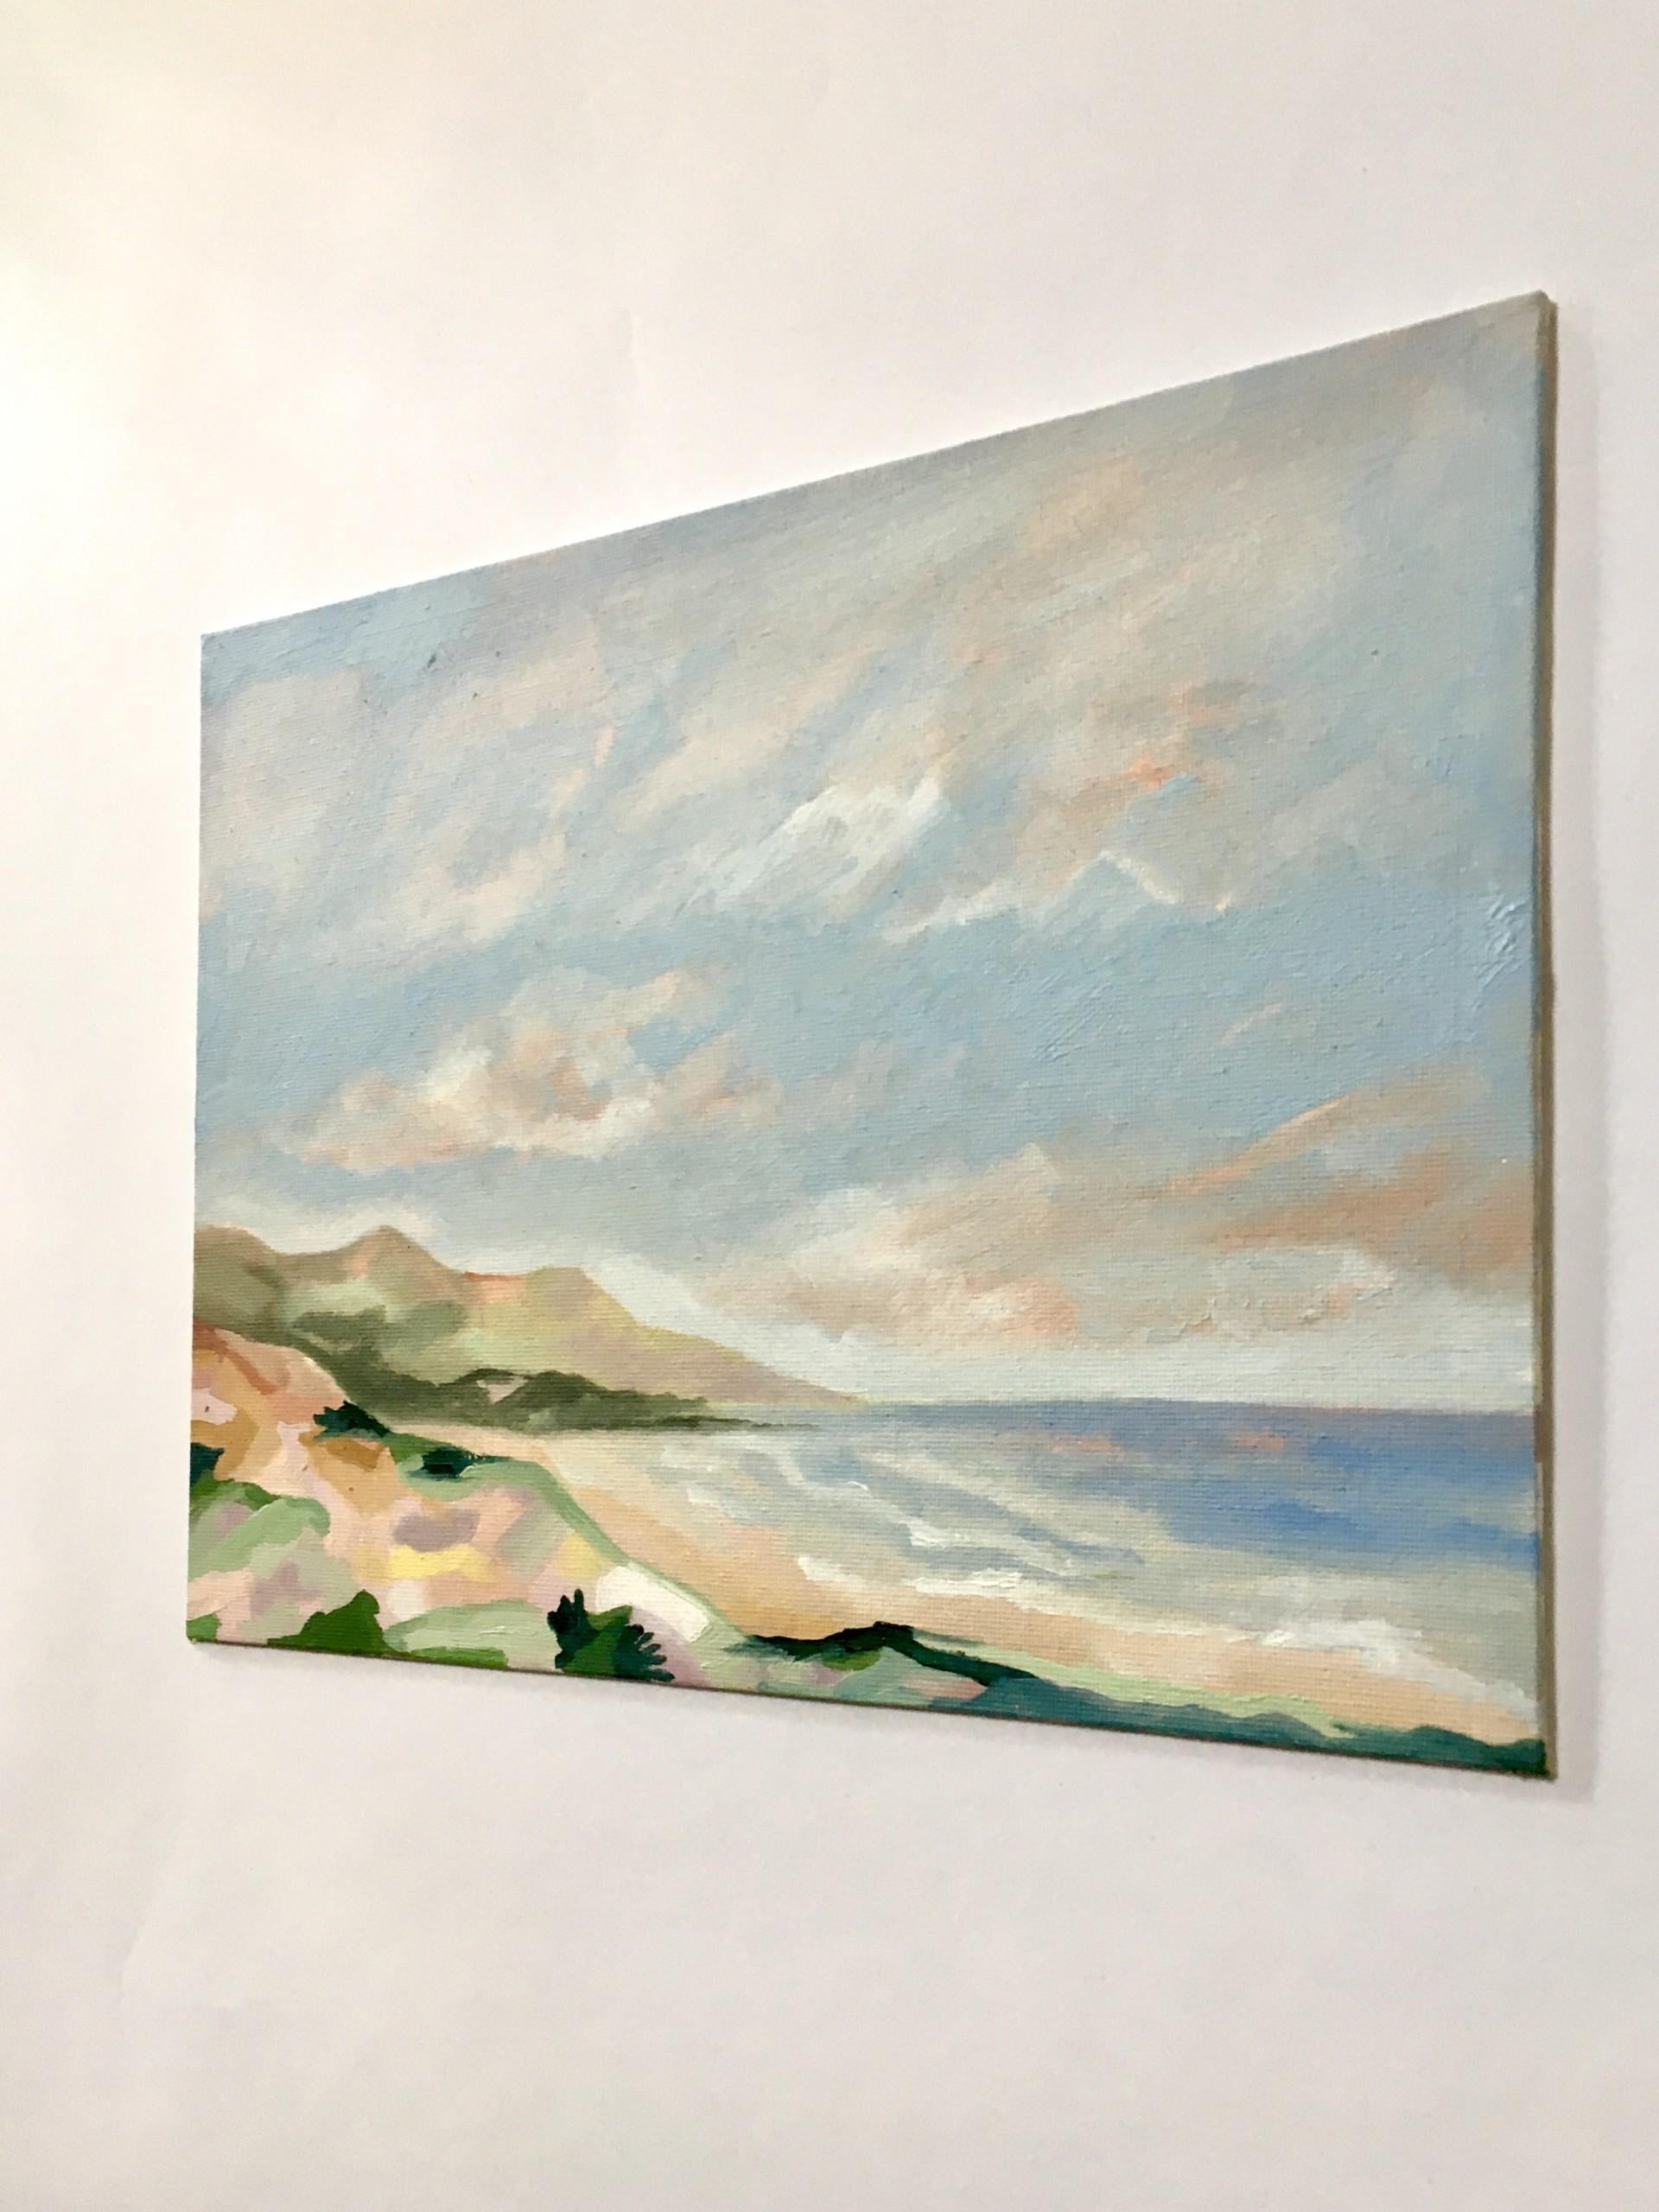 Towards Thurelstone by Sophie Berger [2022]
 
An original oil painting in calm muted colours. Built up in layers, this painting started as a sketch on the South West Coast path walking towards Thurlestone. When looking closely the viewer can see the